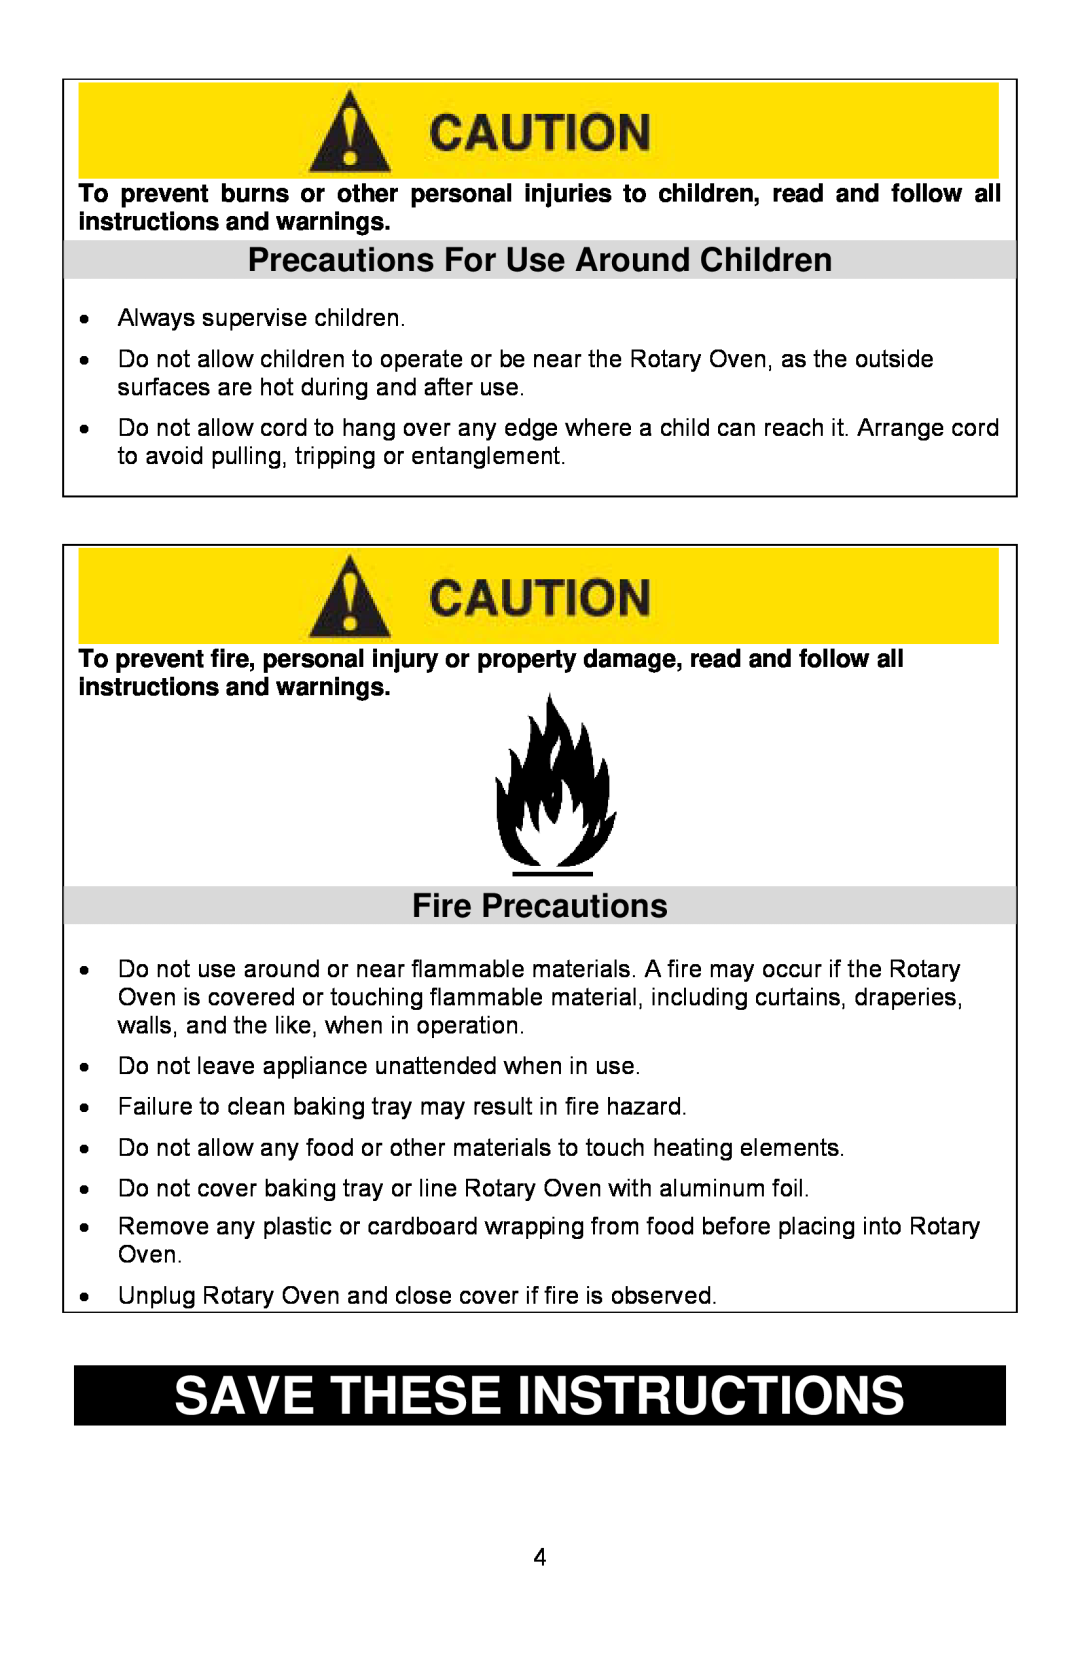 West Bend Rotisserie Oven instruction manual Save These Instructions, Precautions For Use Around Children, Fire Precautions 